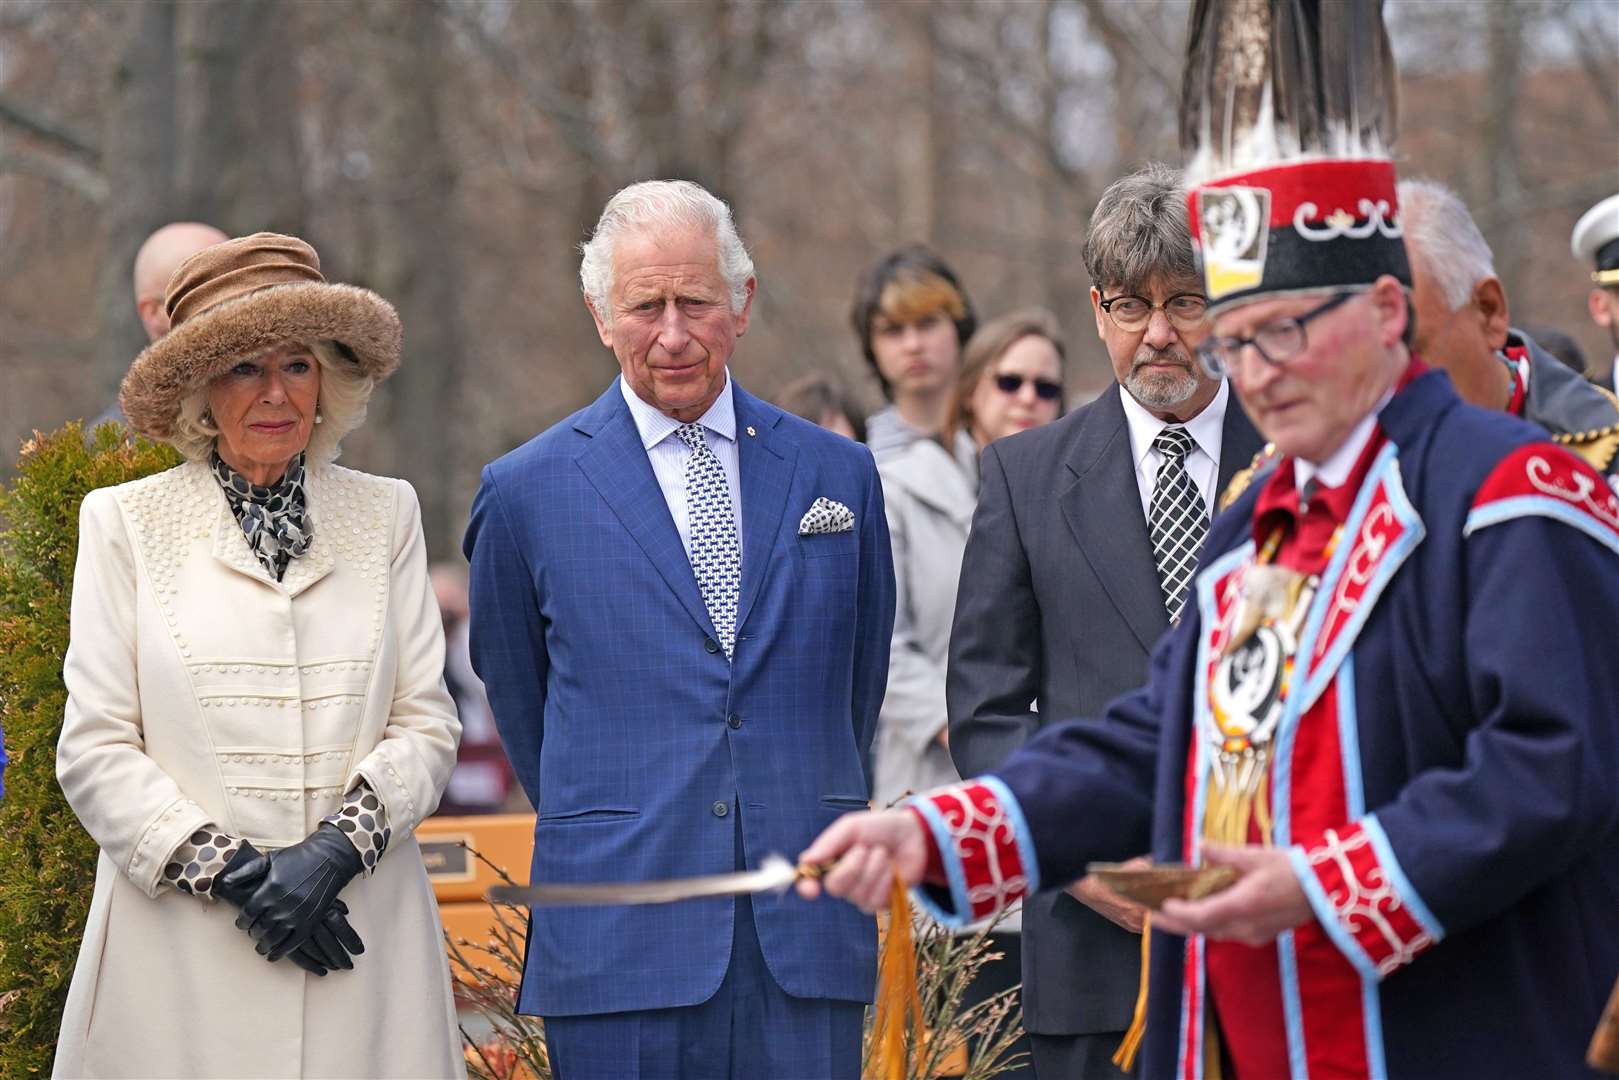 The Prince of Wales (second left) and Duchess of Cornwall attend a solemn ceremony in a Heart Garden remembering indigenous victims of Canada’s residential school system (Jacob King/PA)